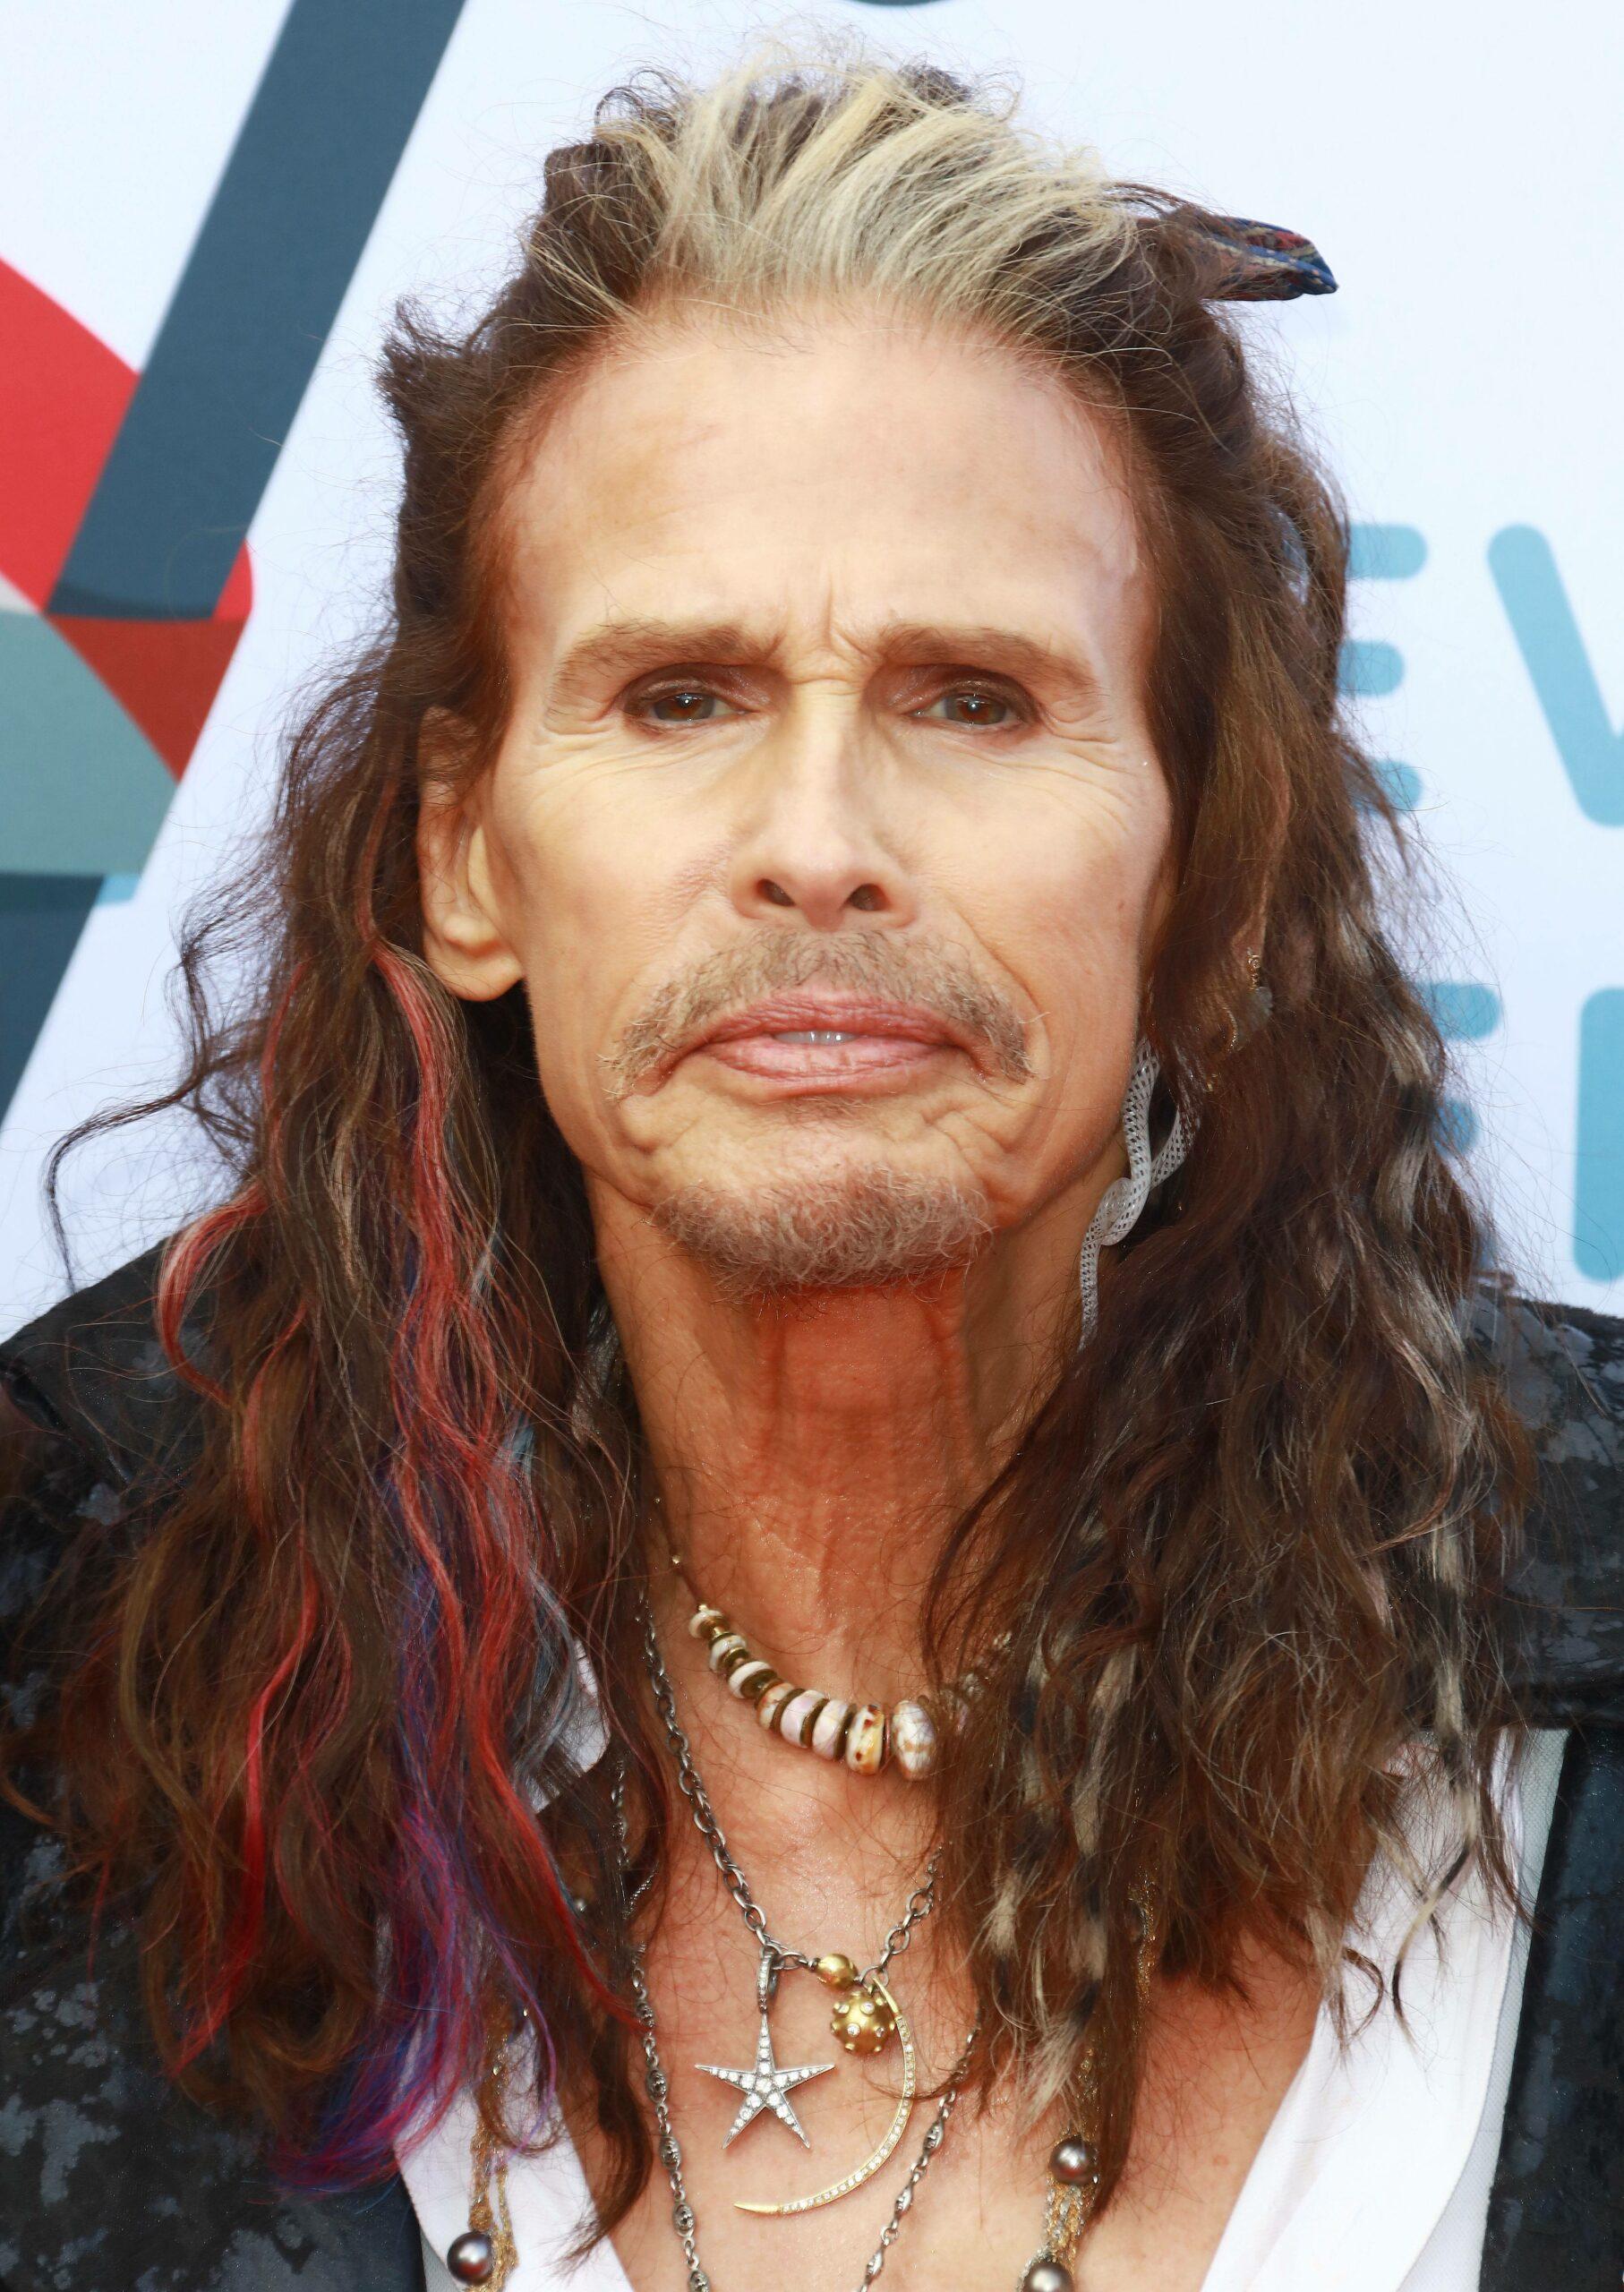 Steven Tyler at 4th Annual GRAMMY Awards Viewing Party Benefitting Janies Fund in Los Angeles